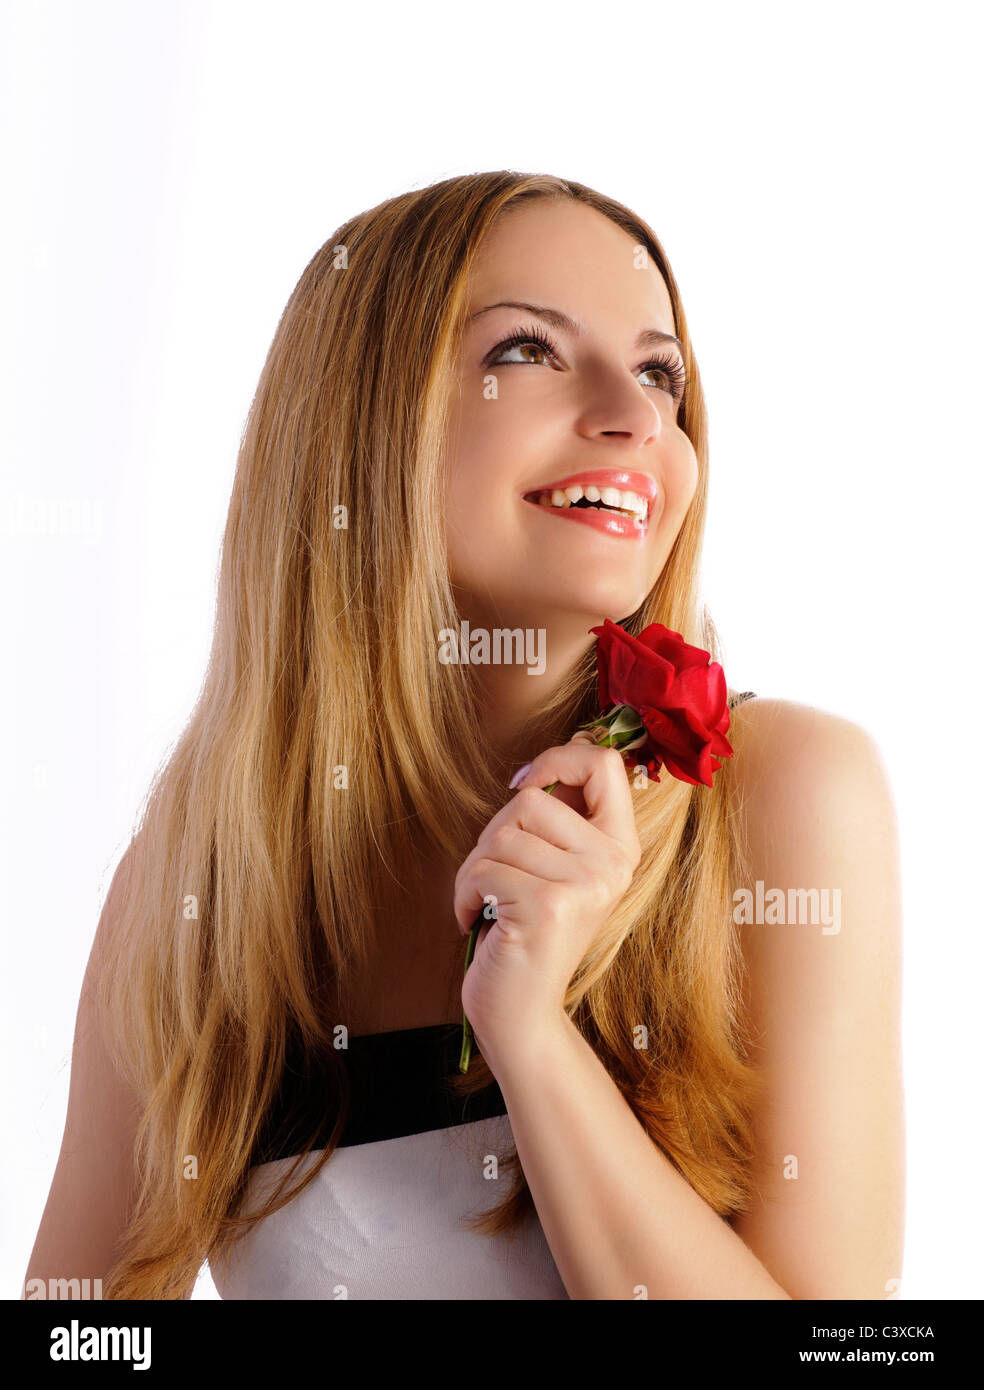 Beautiful girl holding a flower, smiling and looking at something above her, isolated Stock Photo